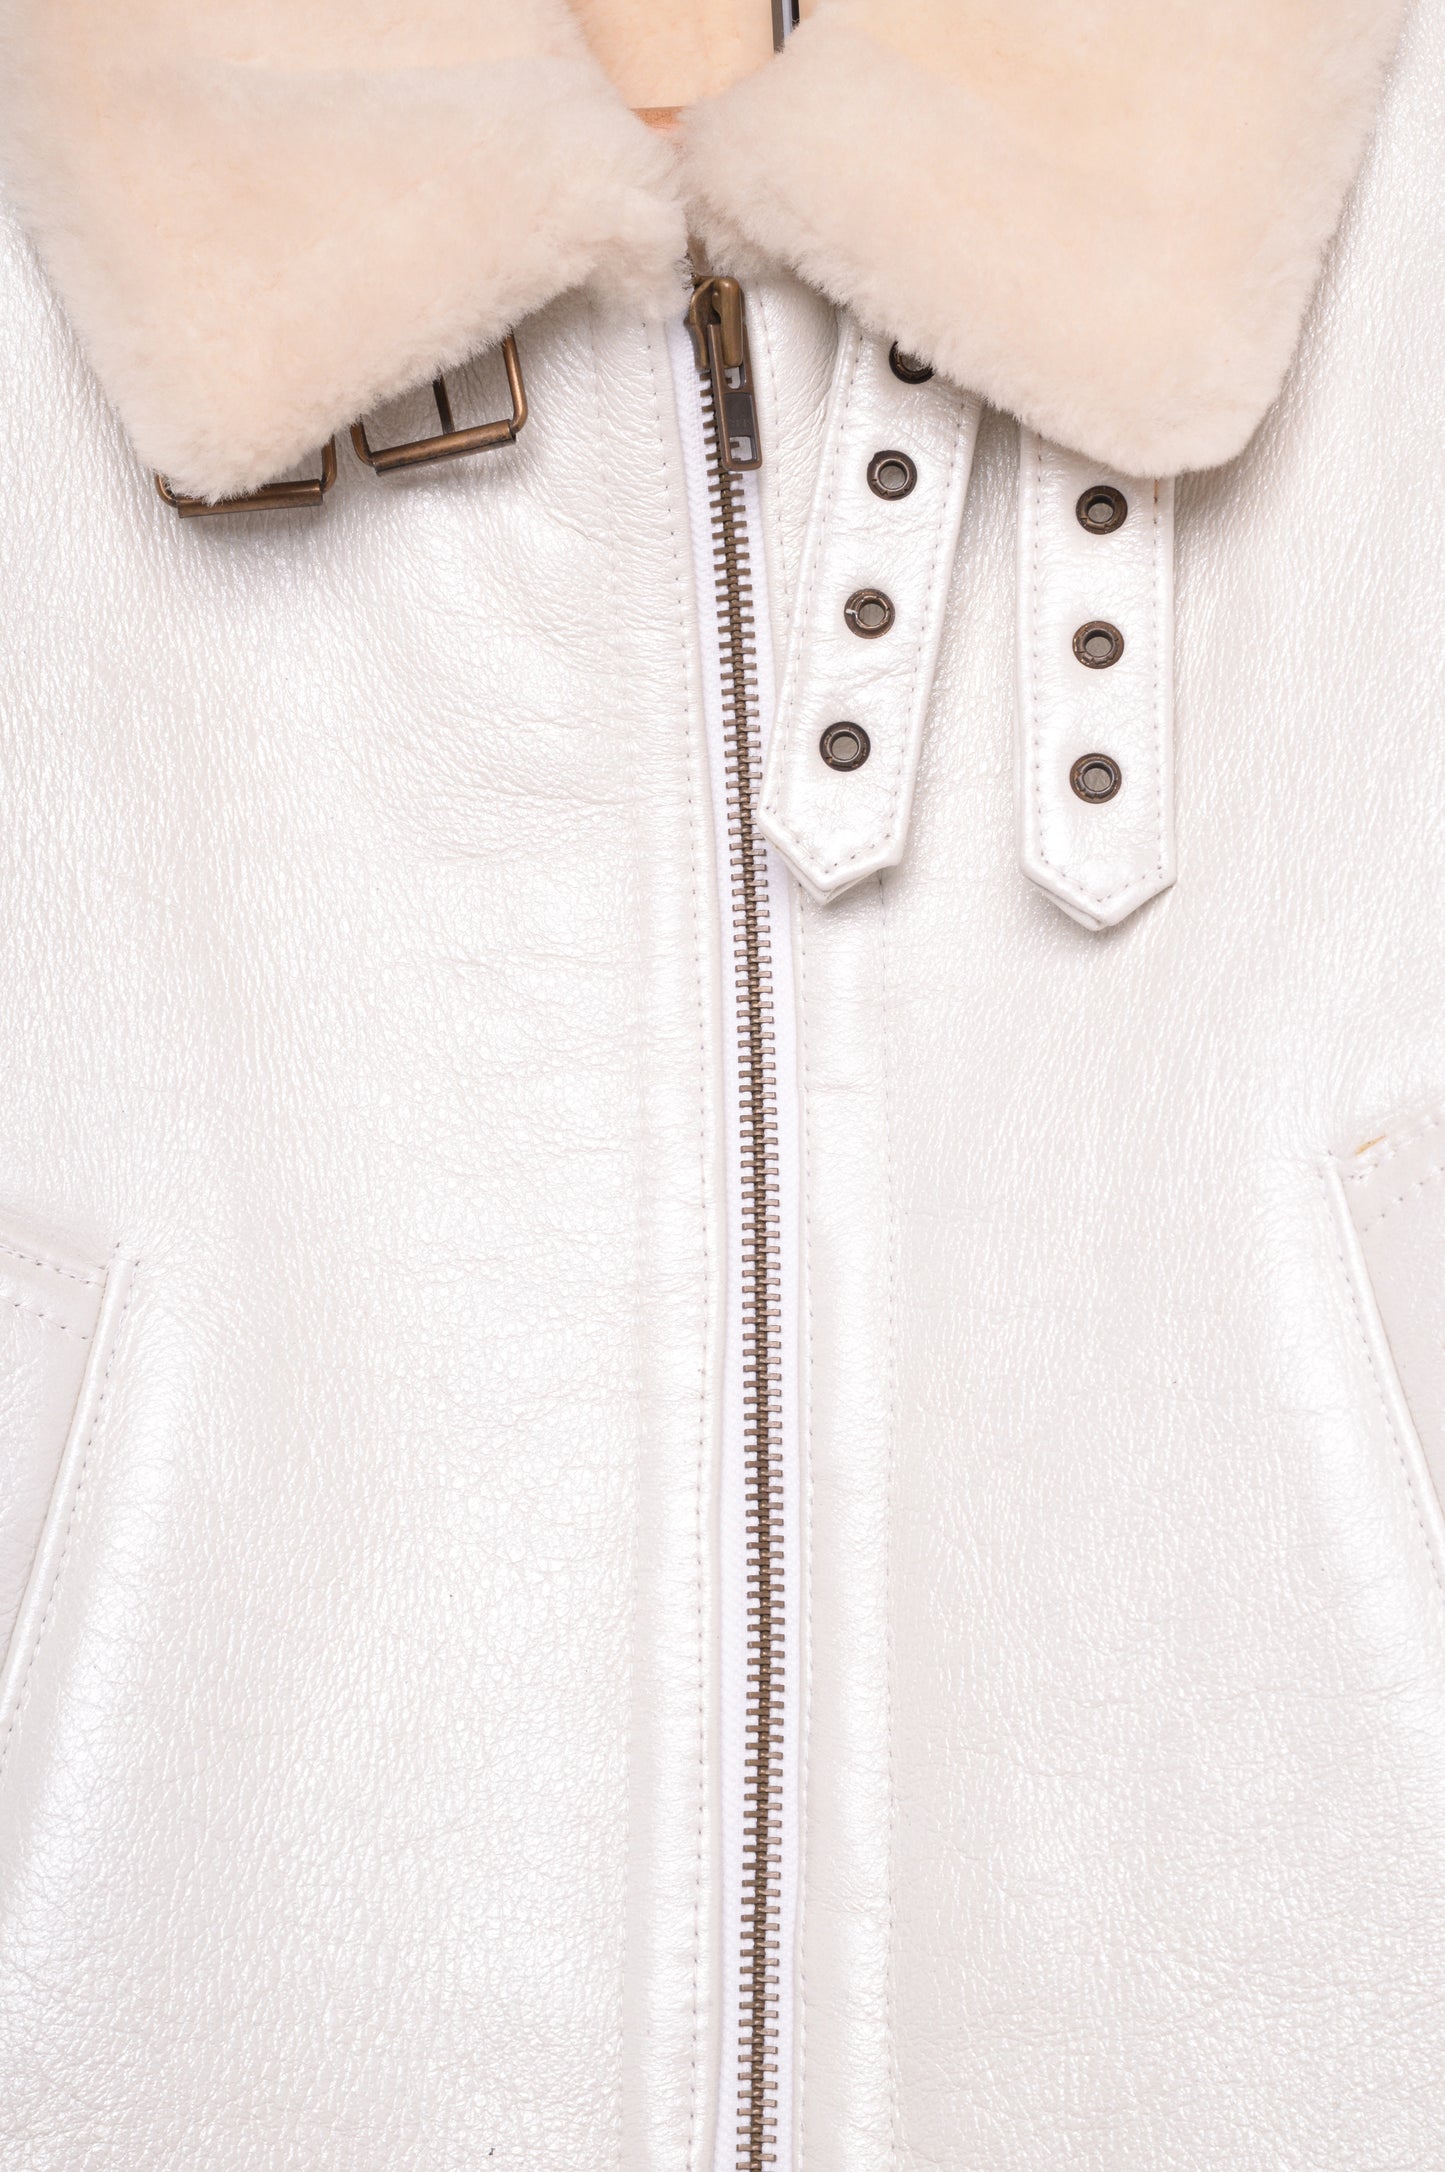 Shearling Lined Leather Aviator Jacket